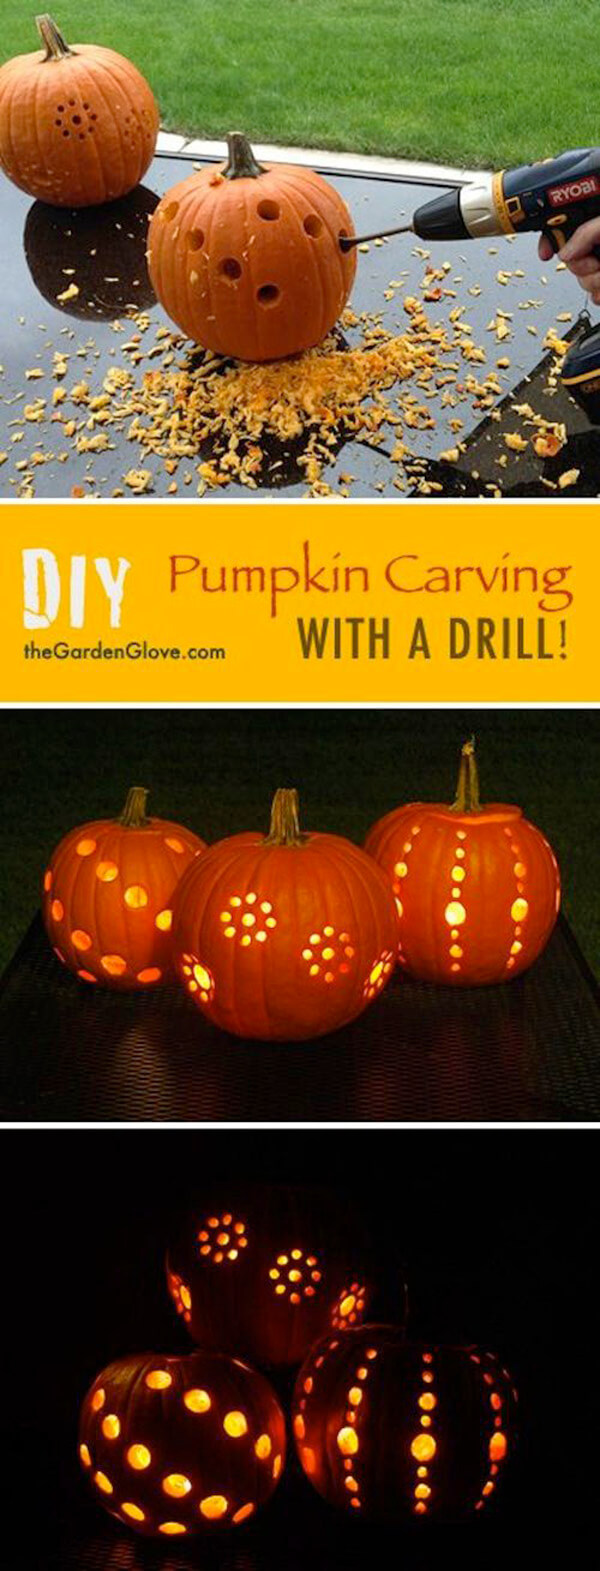 DIY Pumpkin Carving With A Drill.